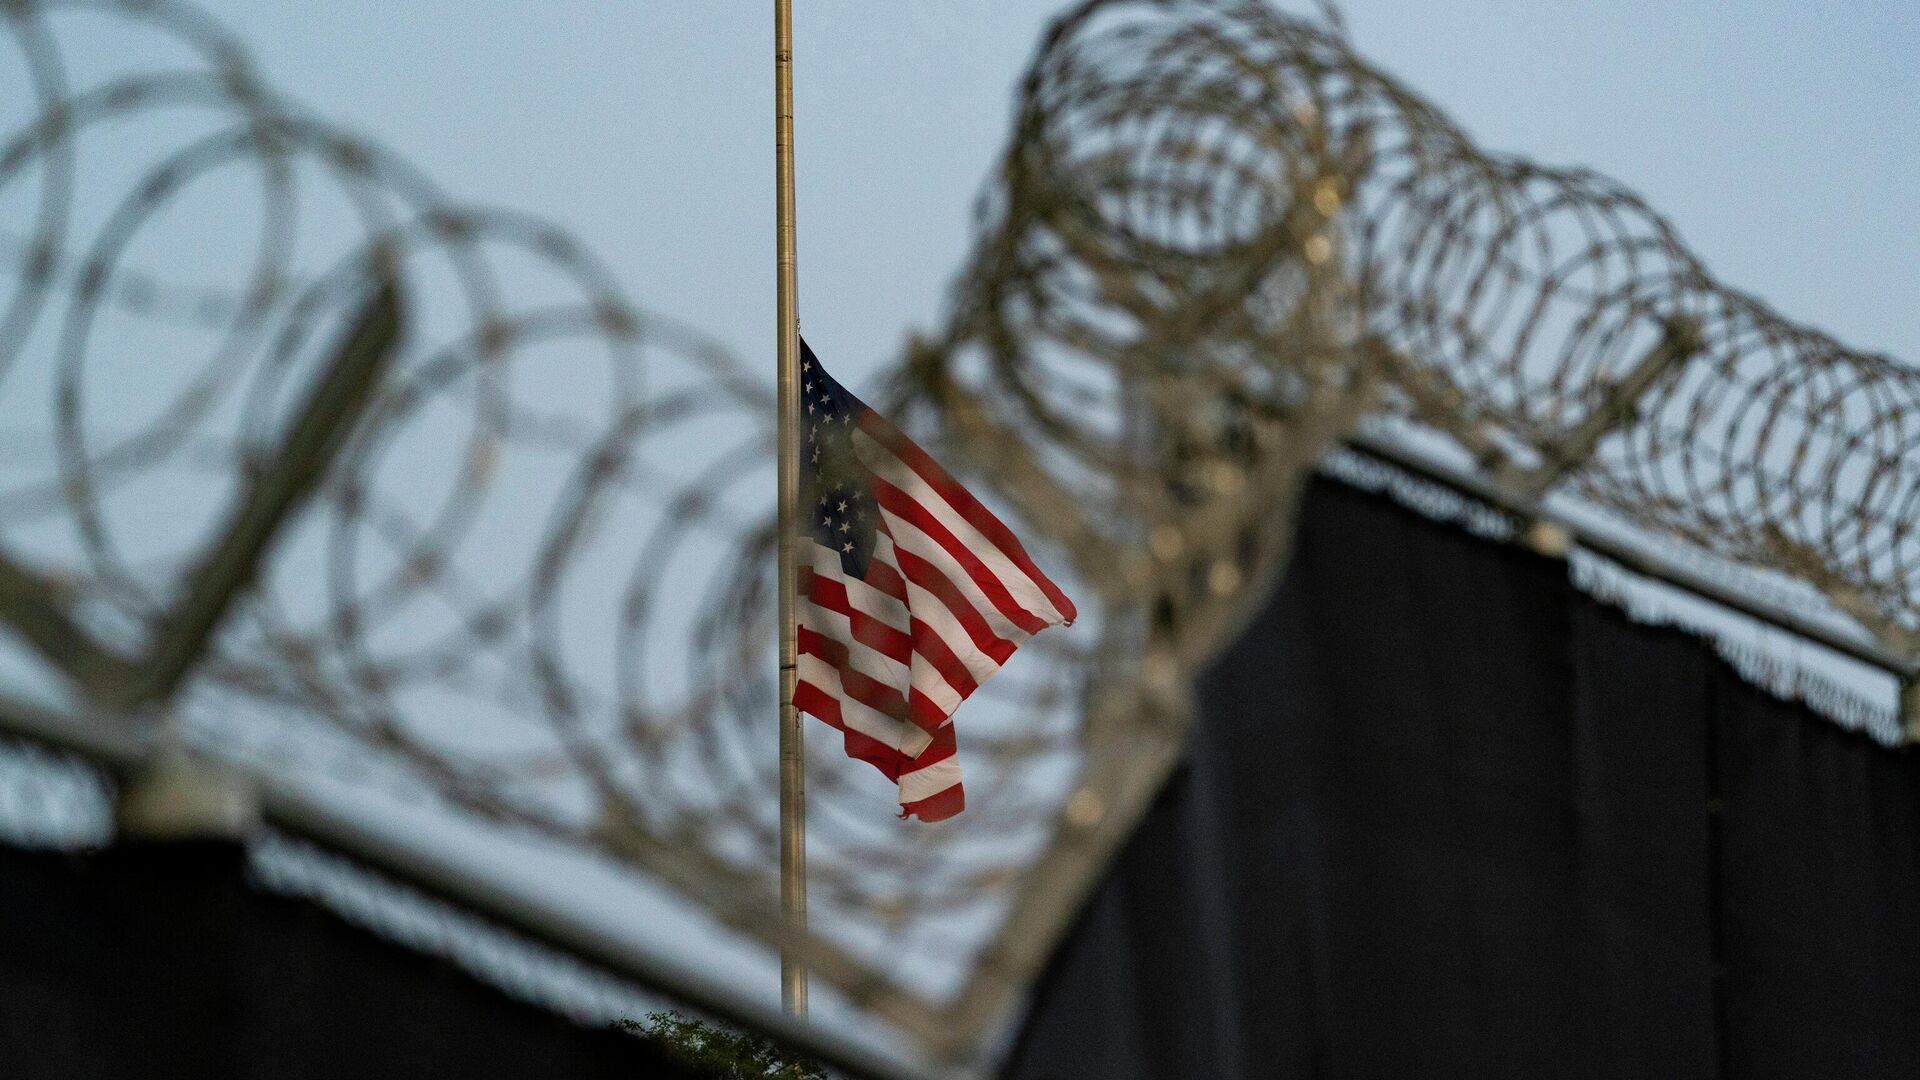 In this Aug. 29, 2021, file photo reviewed by U.S. military officials, a flag flies at half-staff in honor of the U.S. service members and other victims killed in the terrorist attack in Kabul, Afghanistan, as seen from Camp Justice in Guantanamo Bay Naval Base, Cuba. - Sputnik International, 1920, 07.06.2022